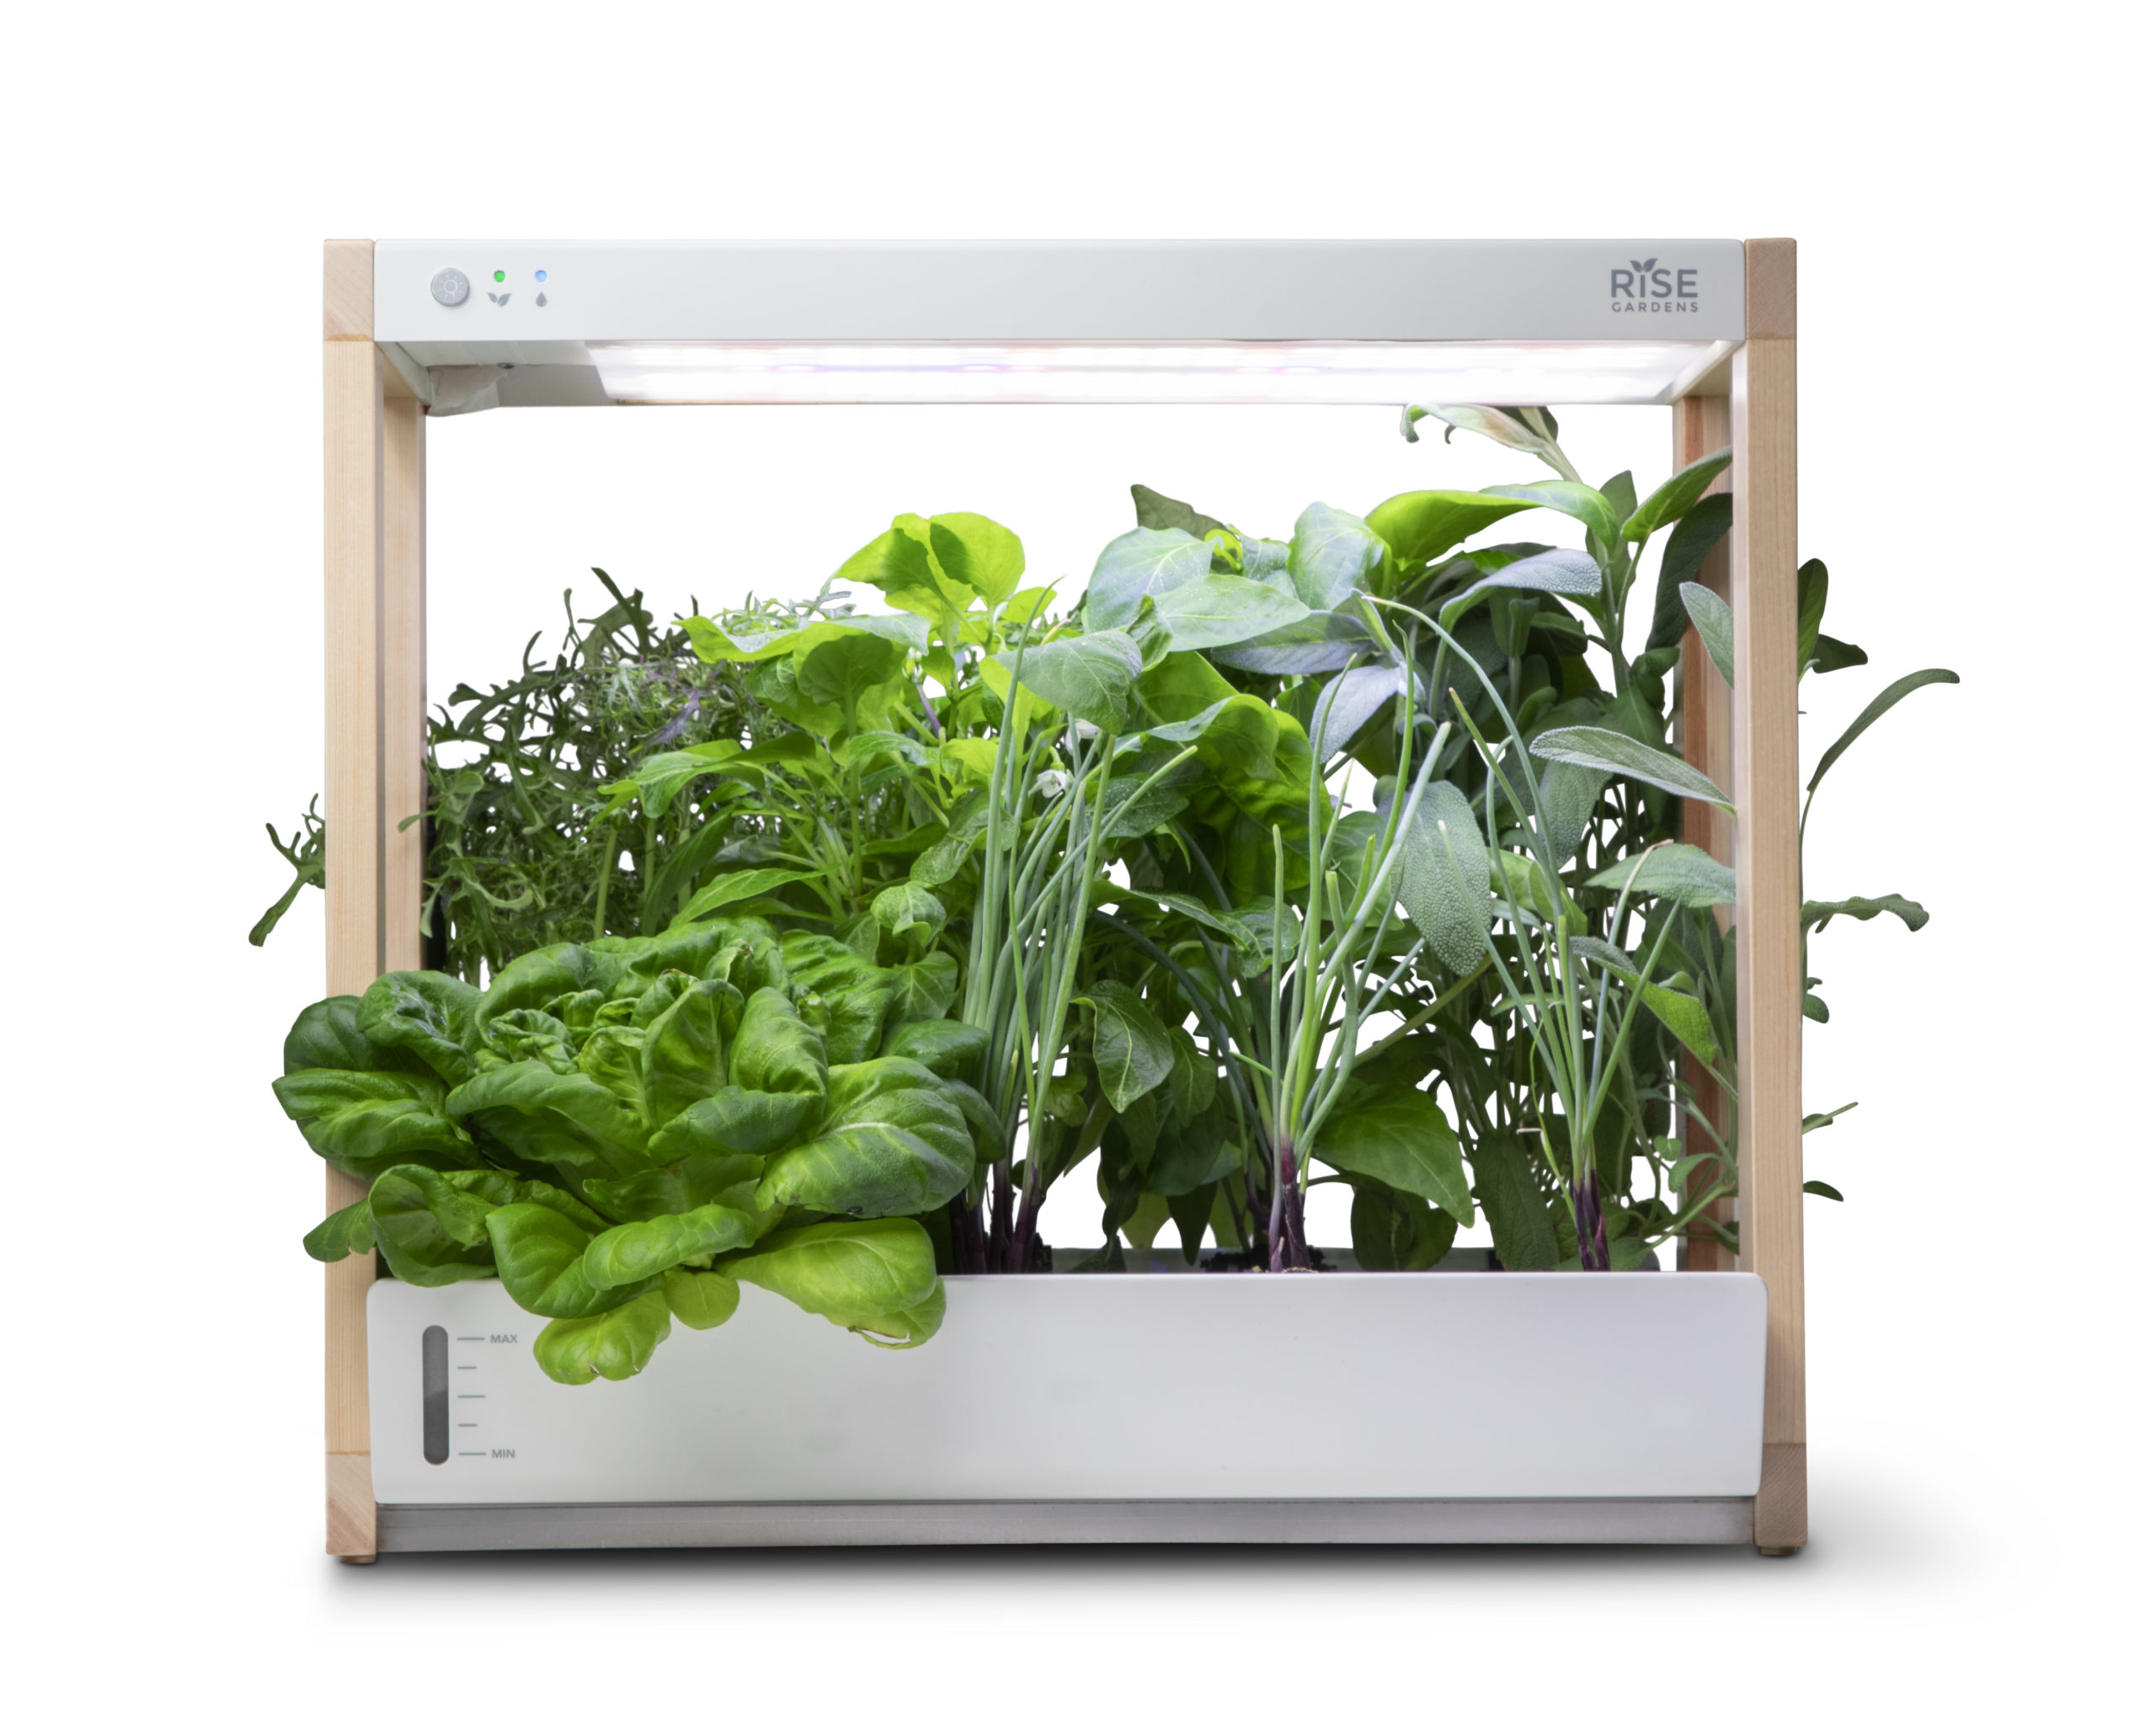 Gift fresh greens and herbs all year with Rise Gardens